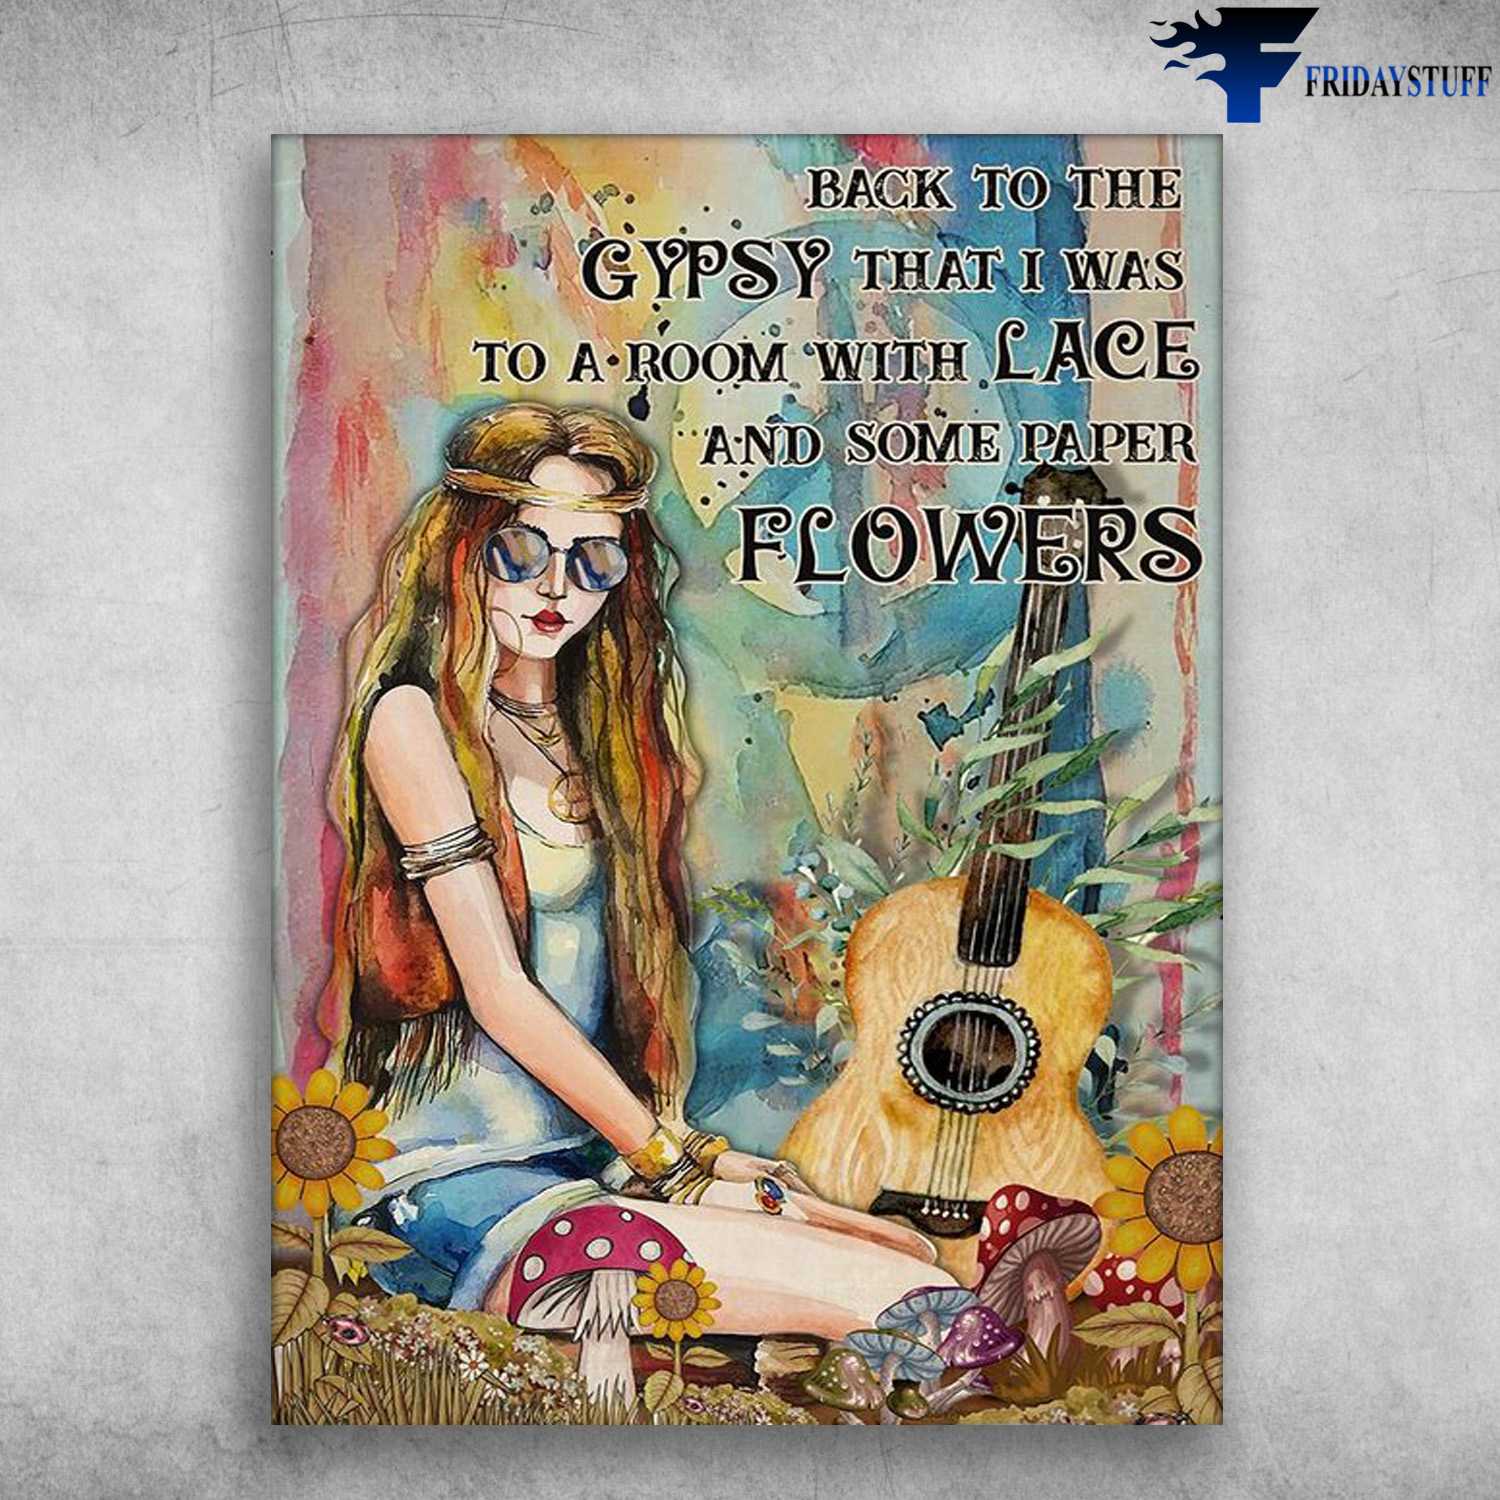 Hippie Girl, Guitar Lover, Back To The Gypsy That I Was To A Room With Lace, And Some Paper Flowers